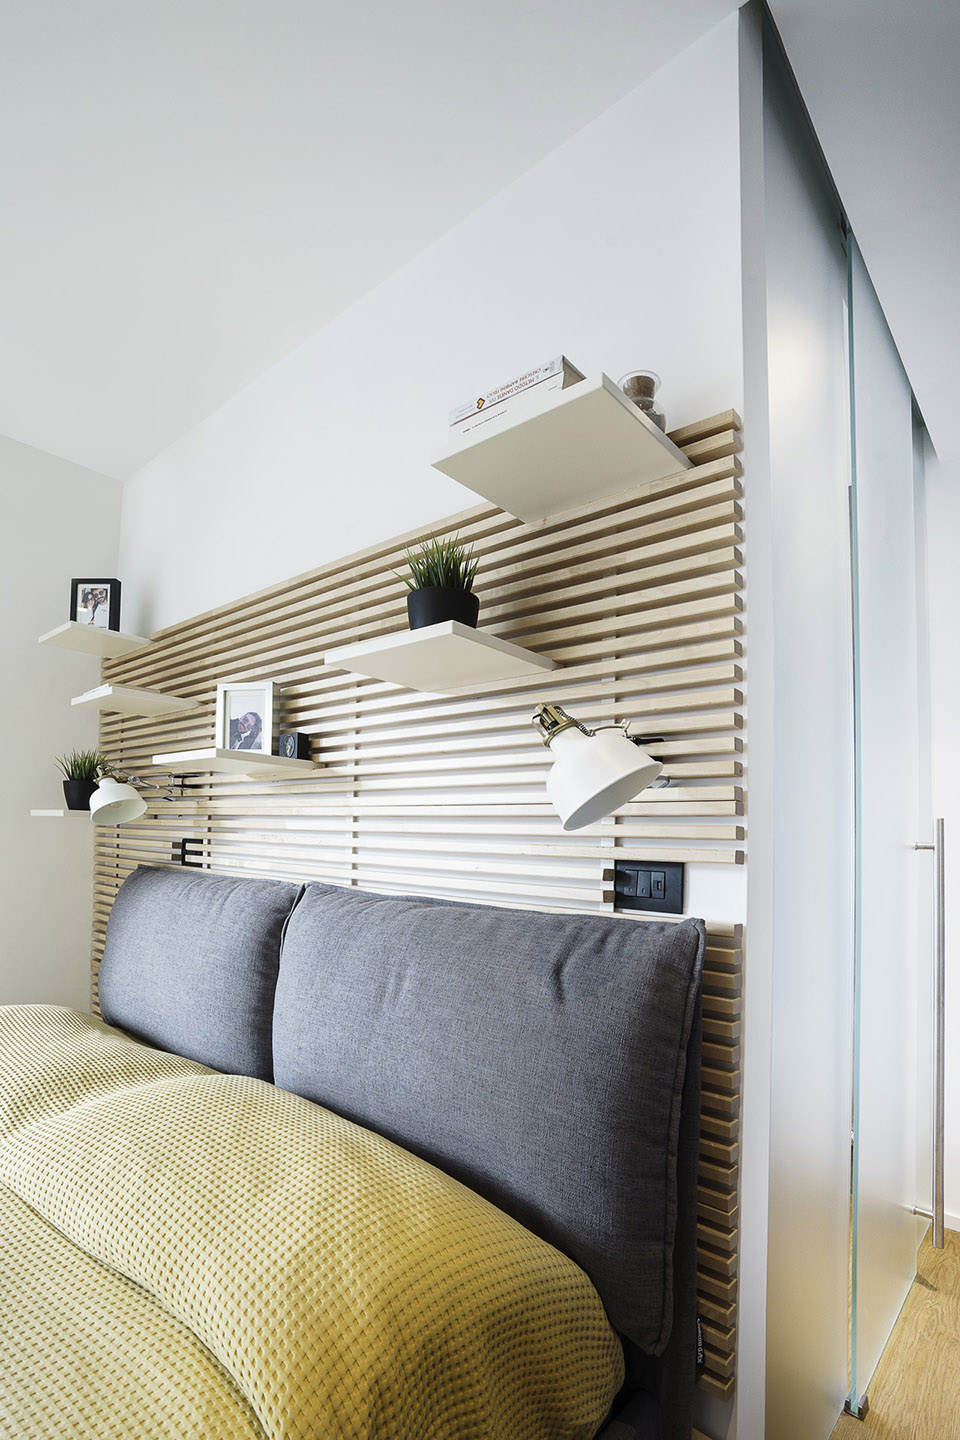 Grid Apartment in Rome, Italy by Brain Factory - Architecture & Design